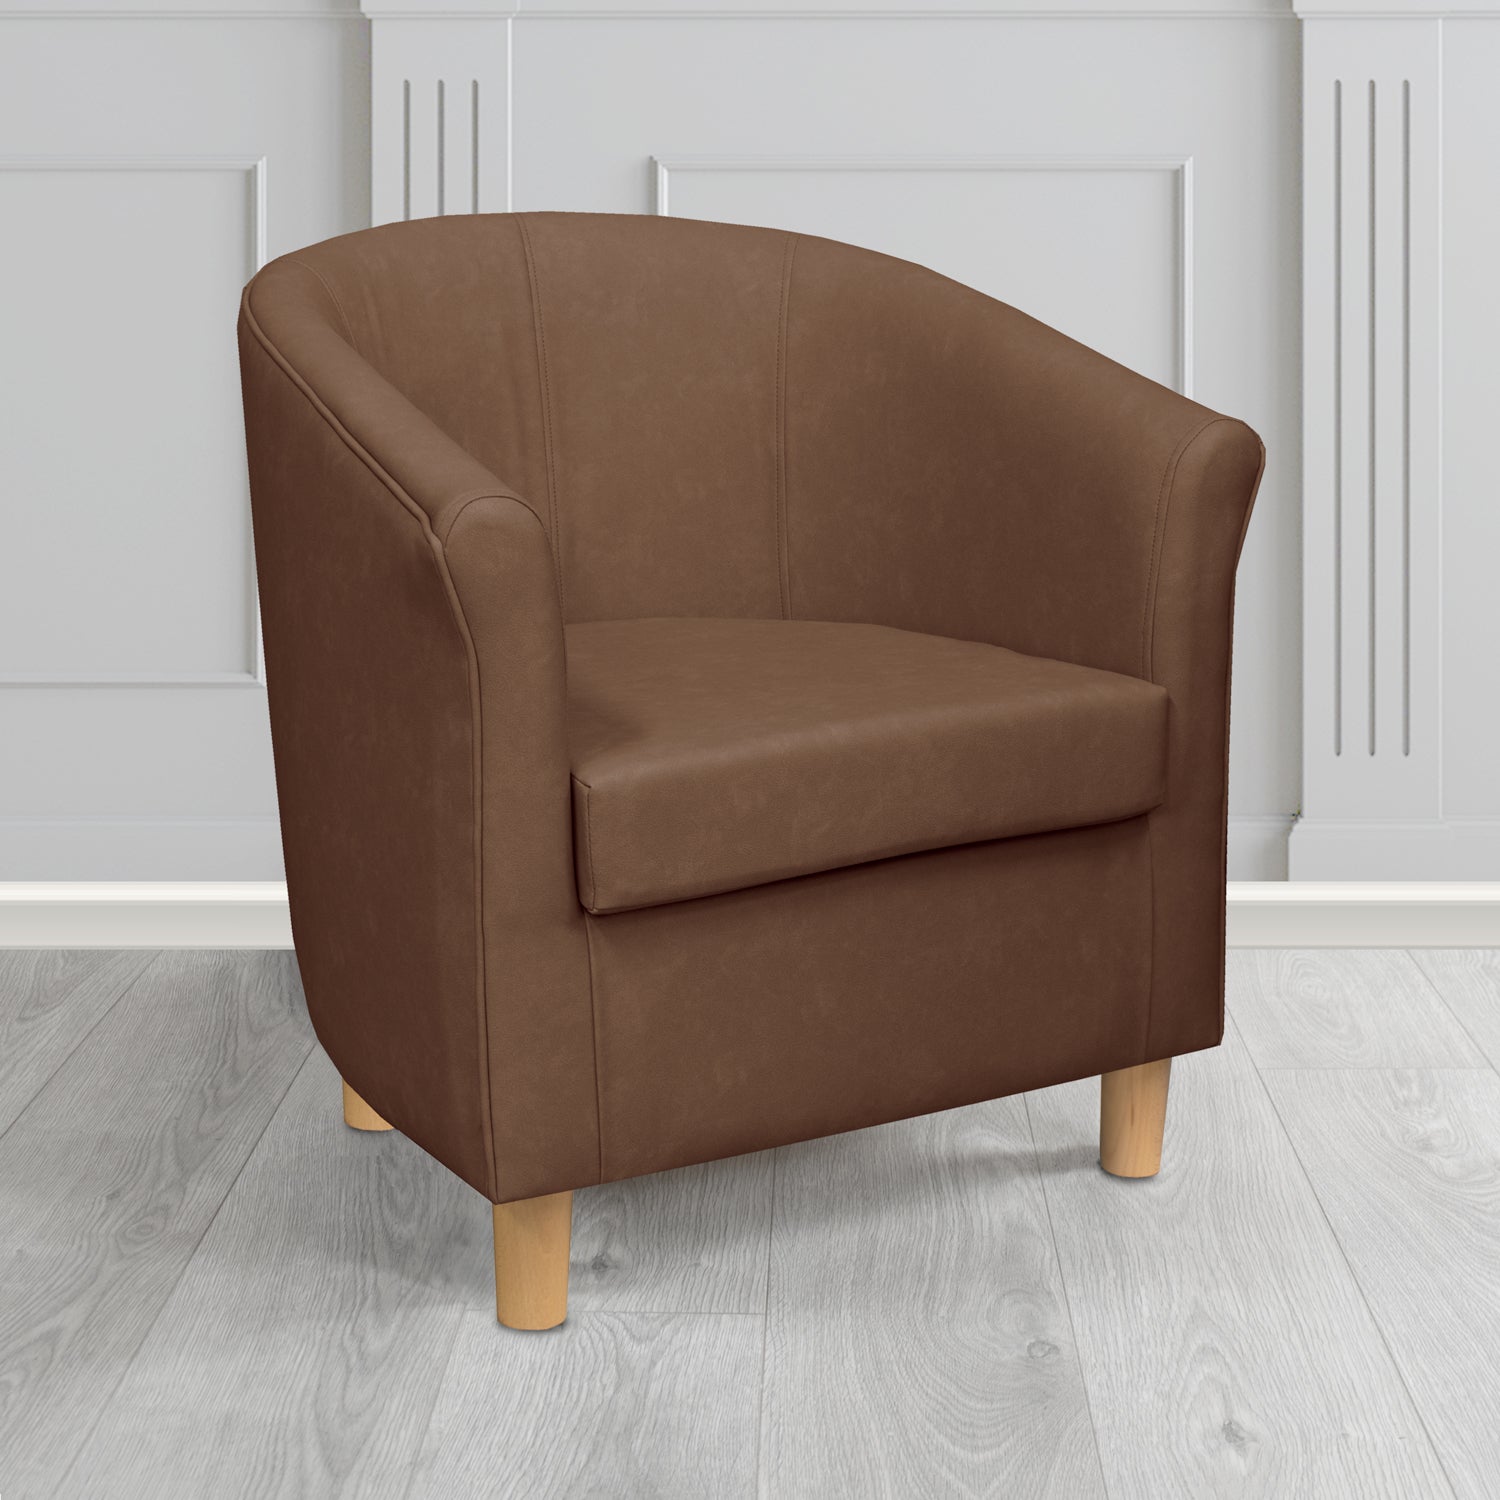 Tuscany Tub Chair in Infiniti Tan INF1850 Antimicrobial Crib 5 Faux Leather - The Tub Chair Shop